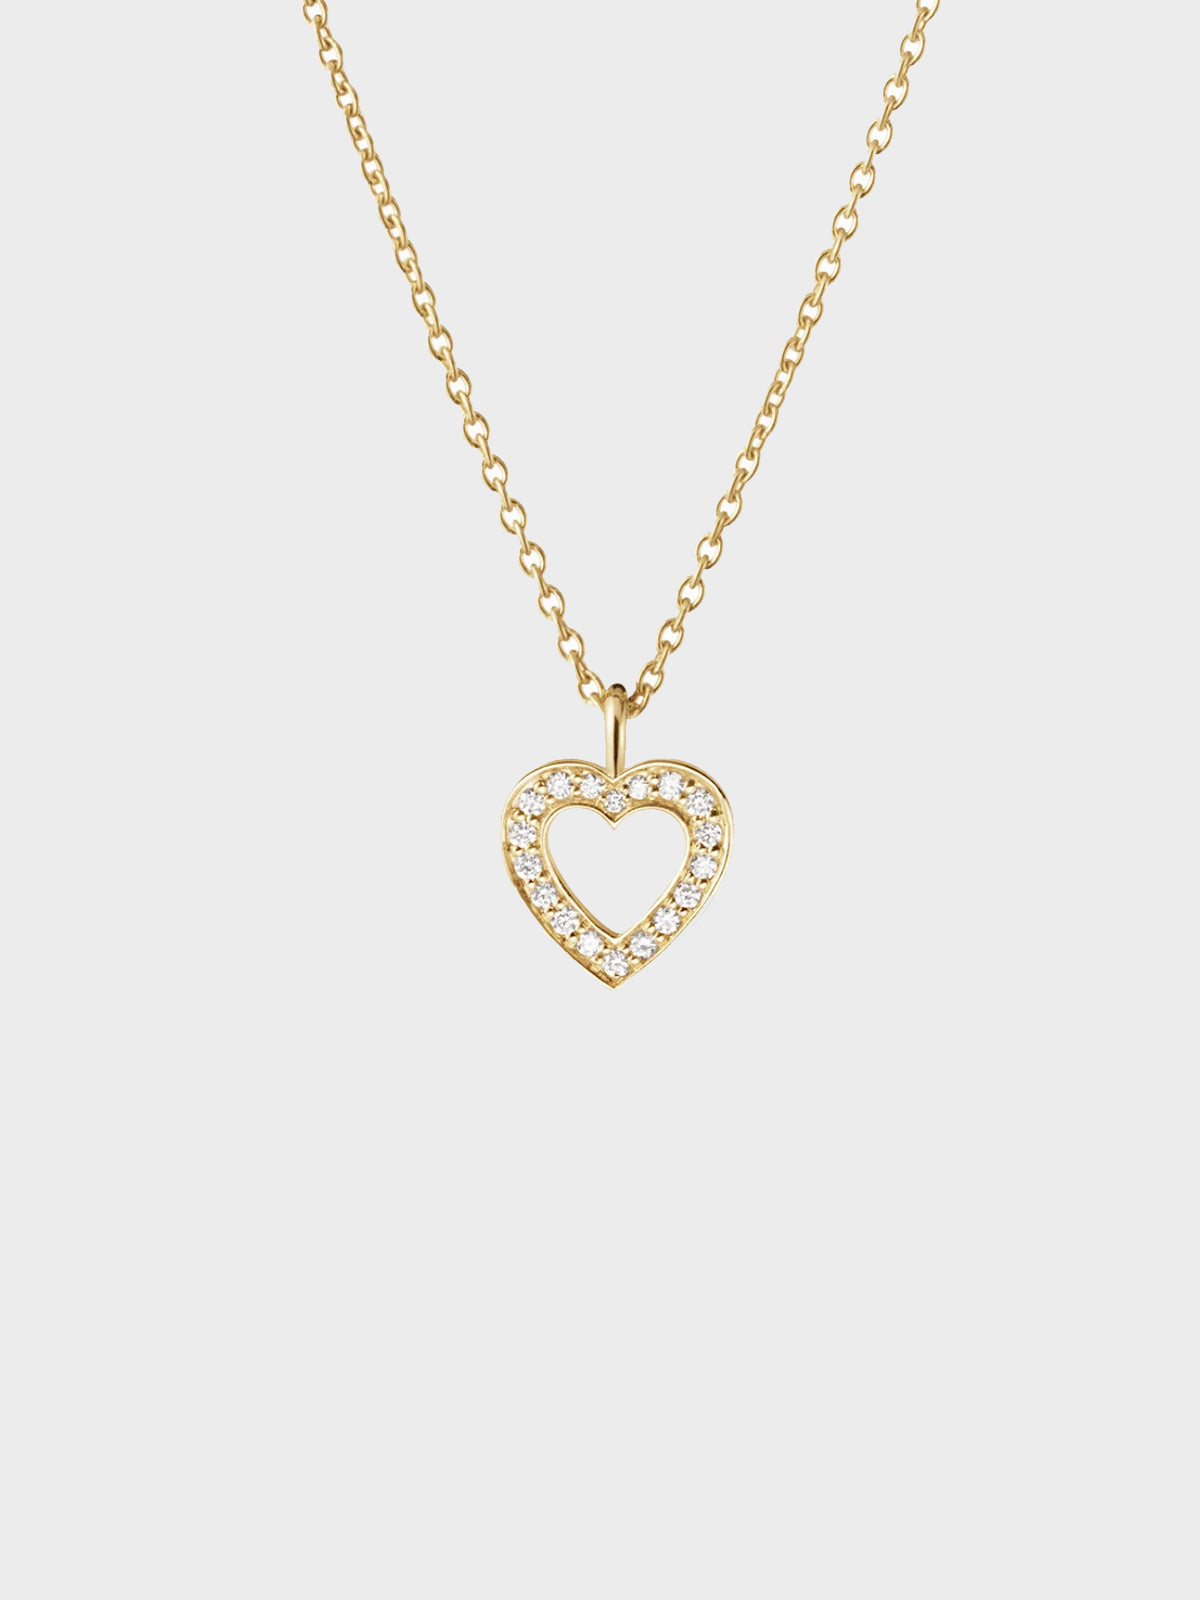 Sophie Bille Brahe - Amour Simple Necklace in 18K Yellow Gold